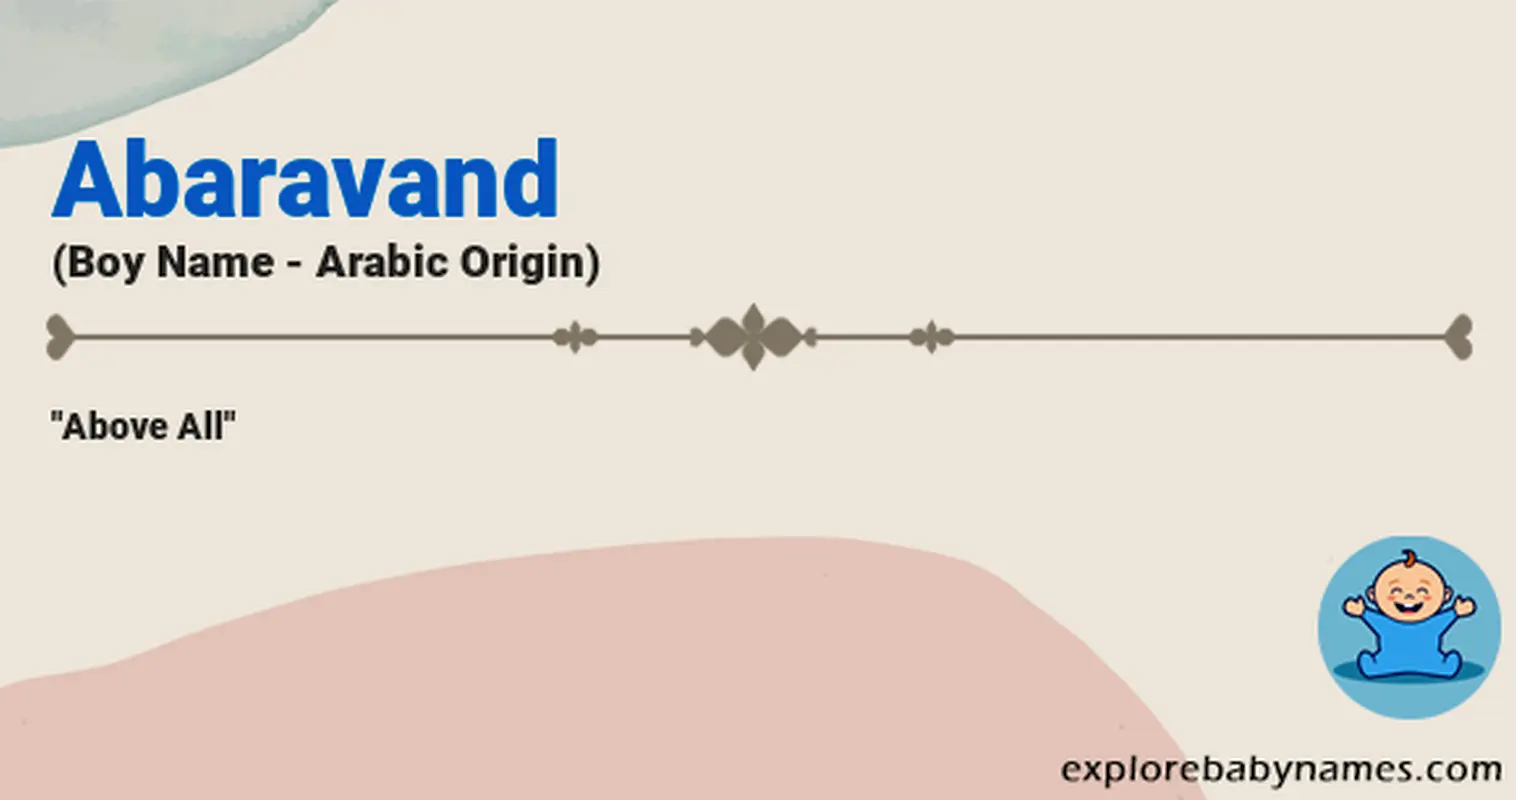 Meaning of Abaravand